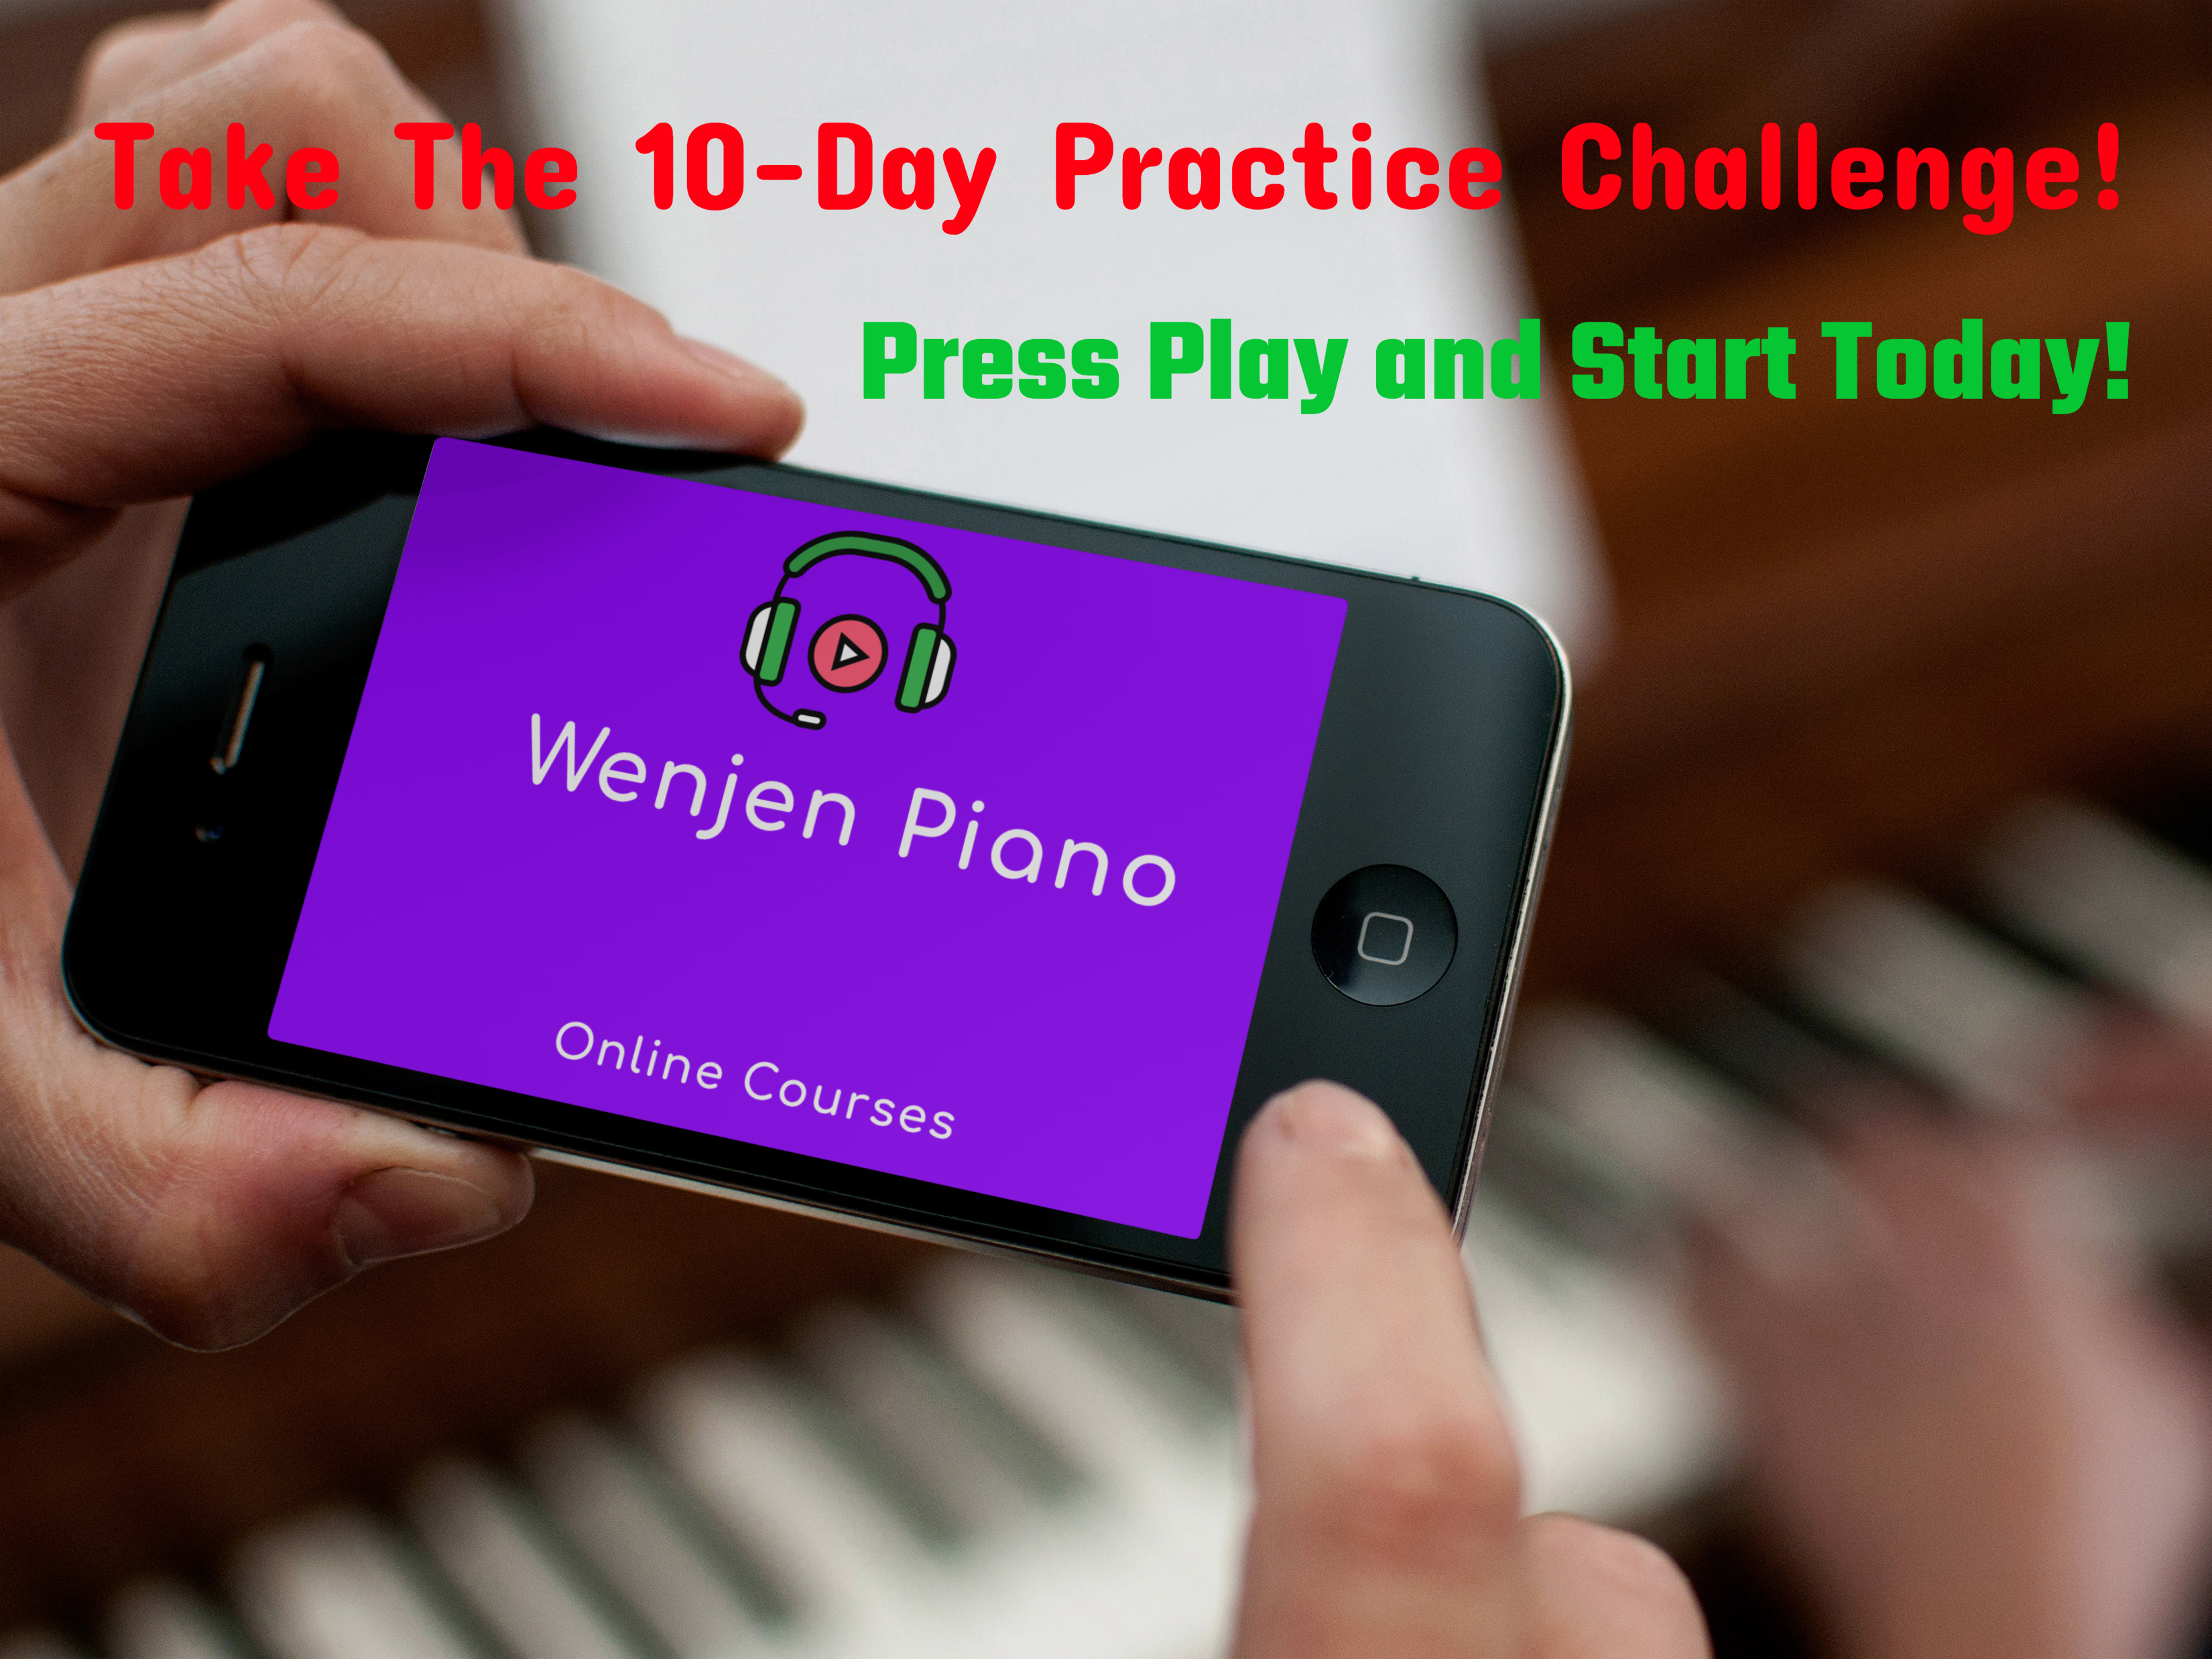 Take the 10-Day Practice Challenge!